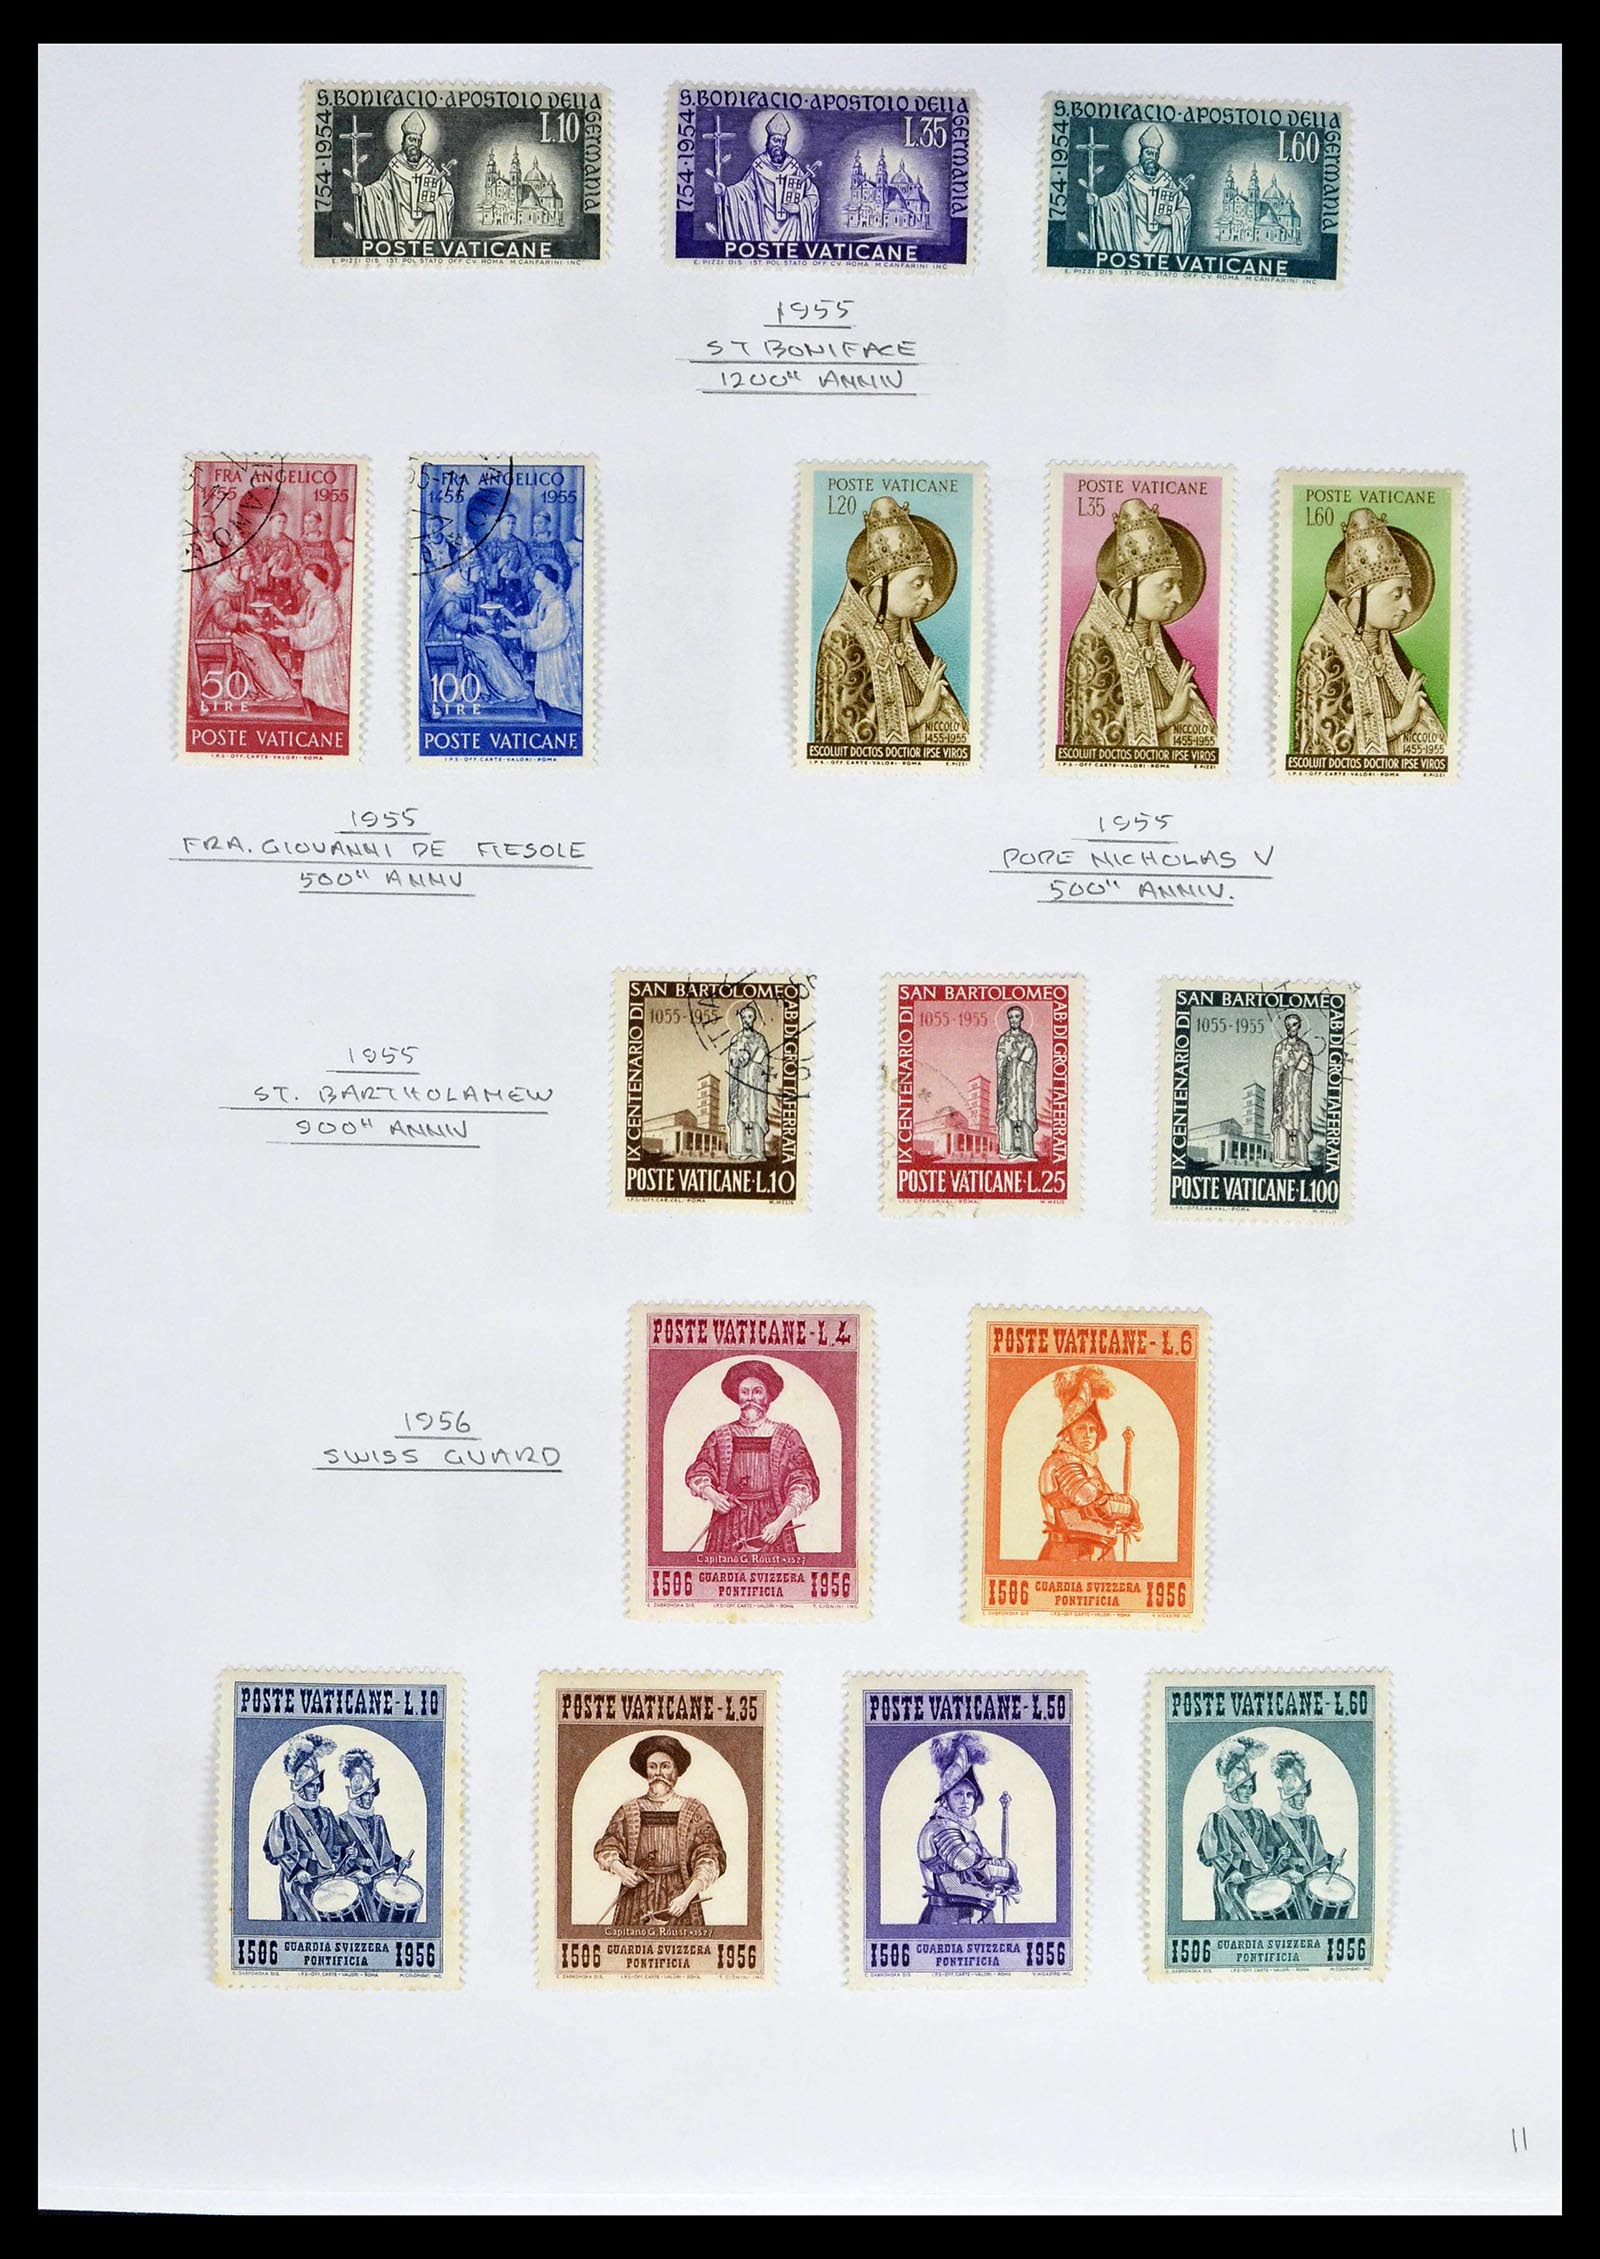 39099 0013 - Stamp collection 39099 Vatican 1852-2008.